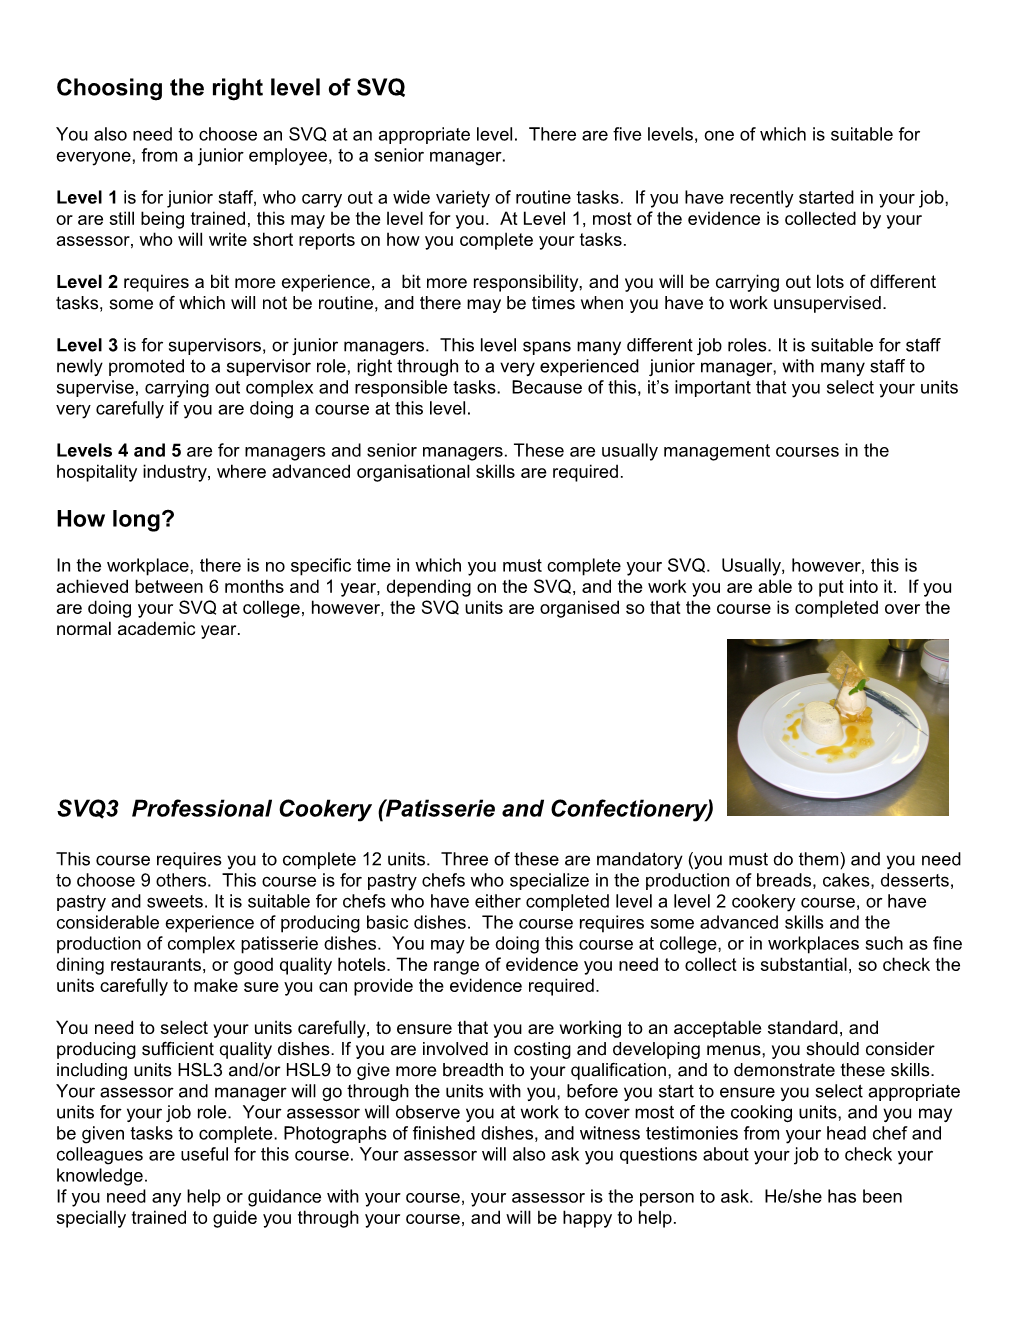 SVQ3 Professional Cookery (Patisserie and Confectionery)